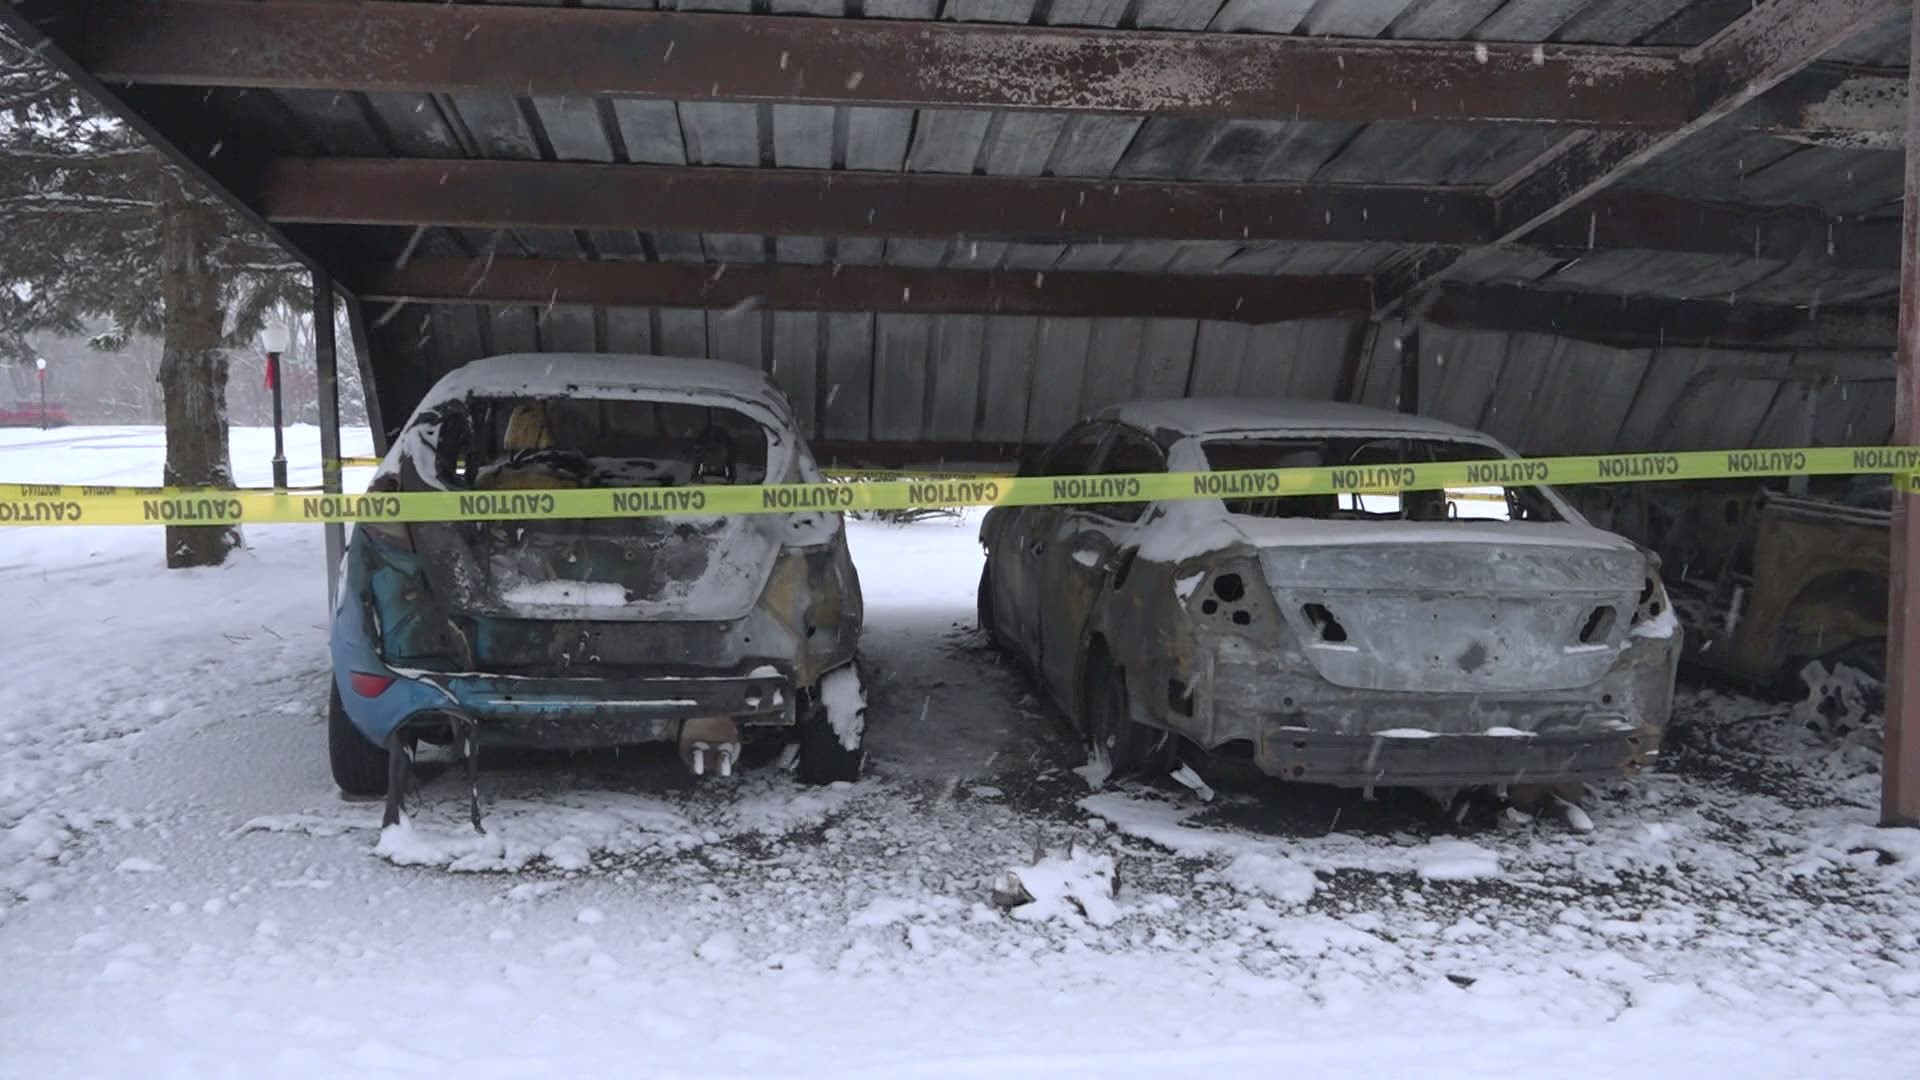 The fire was put out and no one was injured but the carport and at least six vehicles were damaged in the incident.